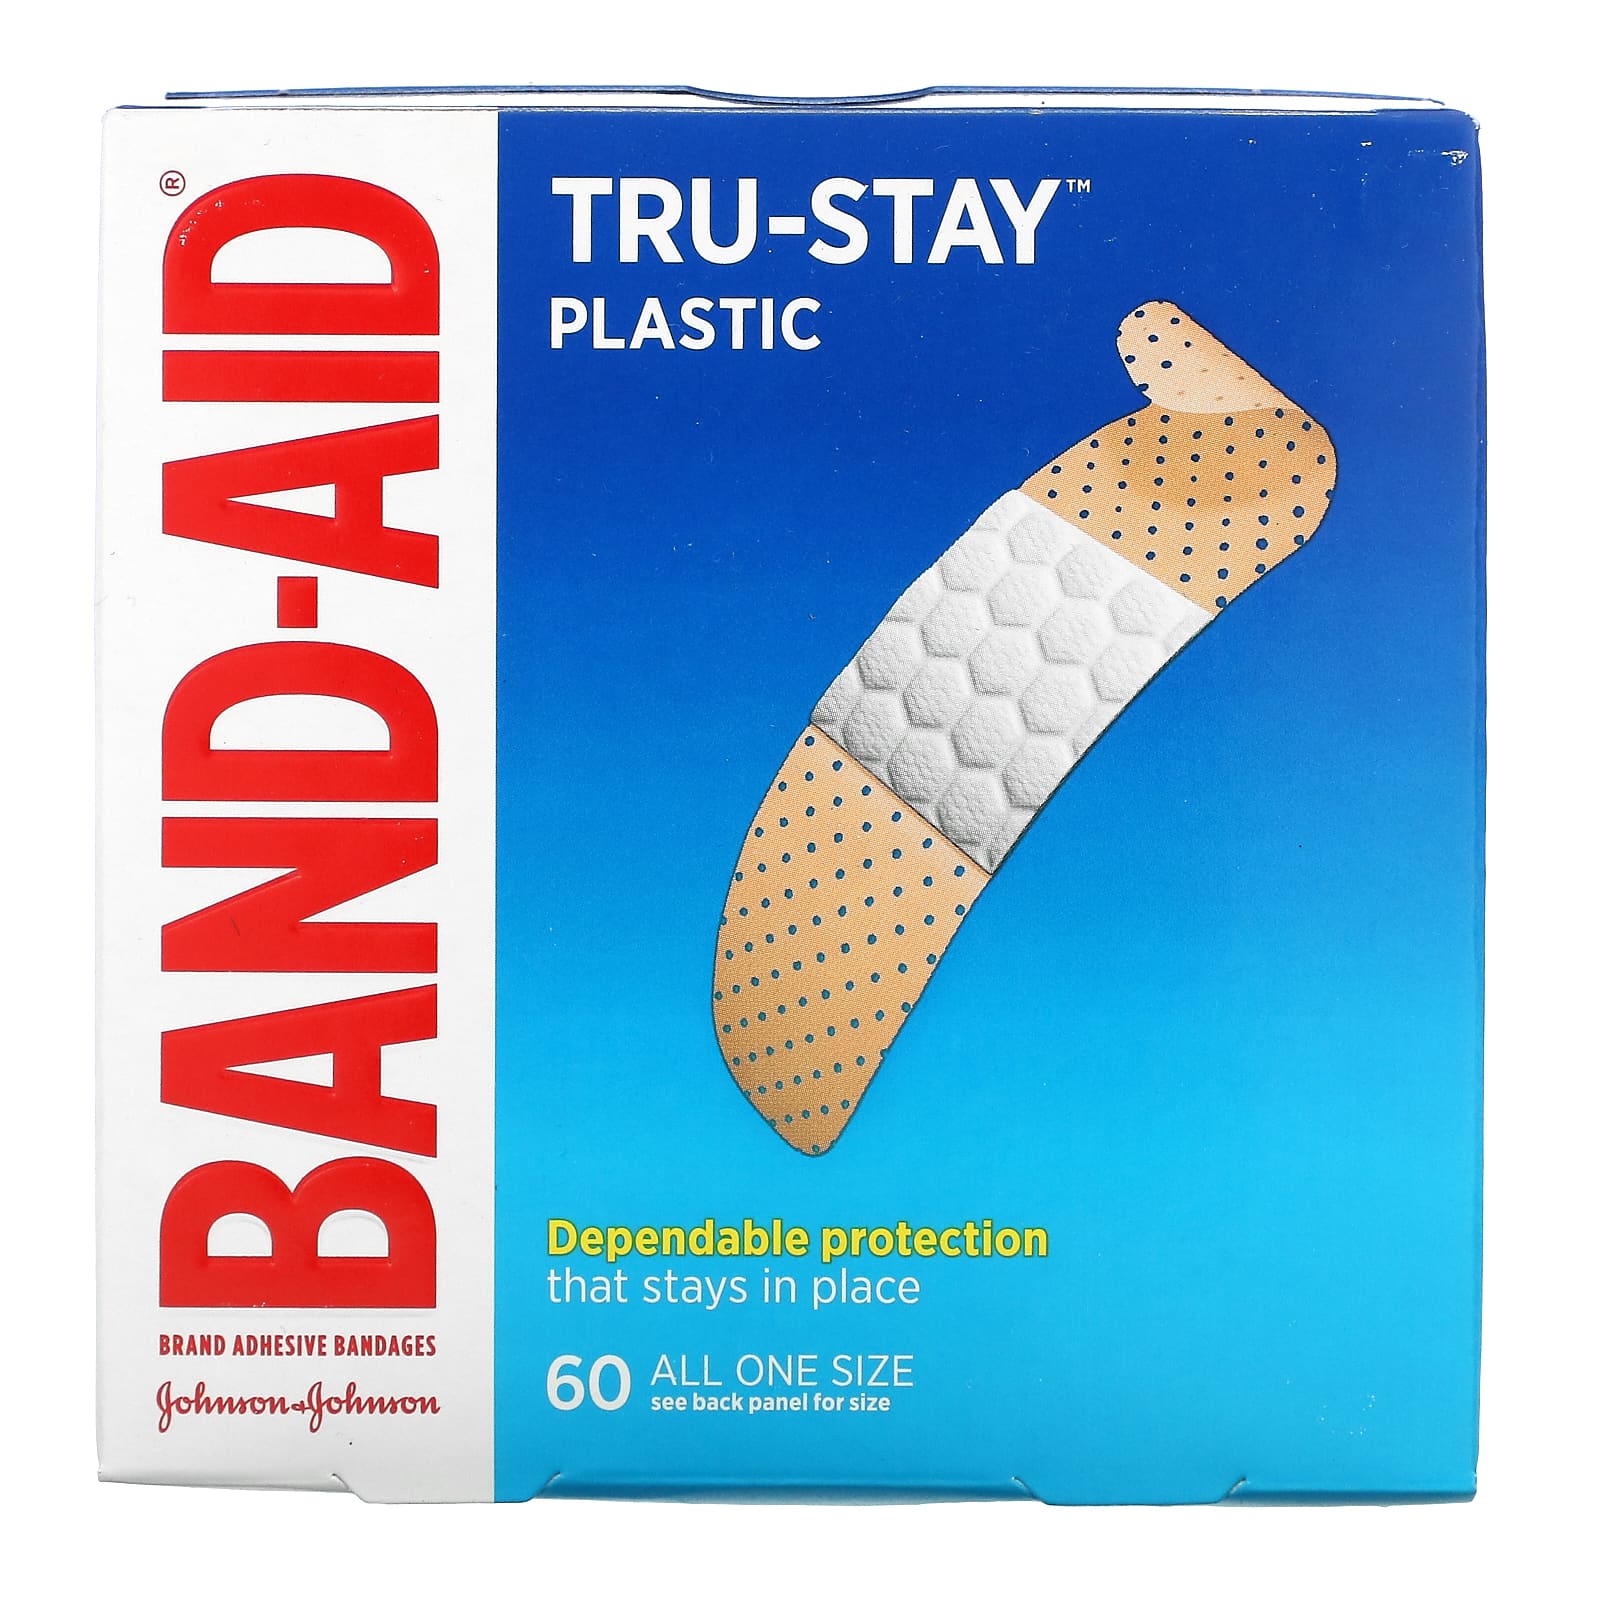 10pcs 3 8cmx3 8cm hypoallergenic non woven adhesive wound dressing band aid bandage large wound first aid outdoor Band Aid Adhesive Bandages Plastic Strips 60 Bandages